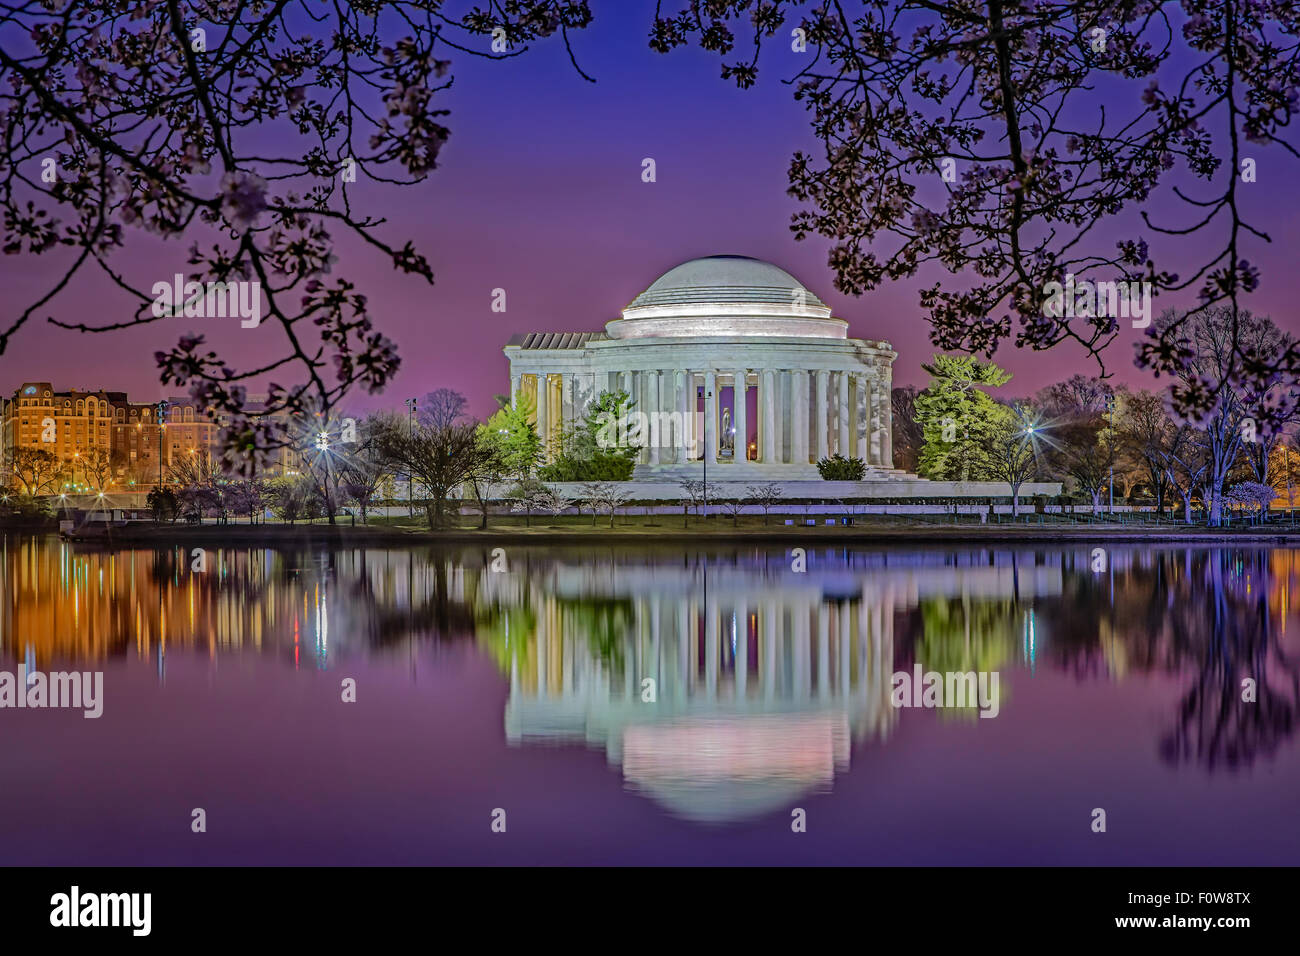 A view of the Thomas Jefferson Memorial from the Tidal Basin in Washington DC during the early morning twilight hour before sunrise. Stock Photo